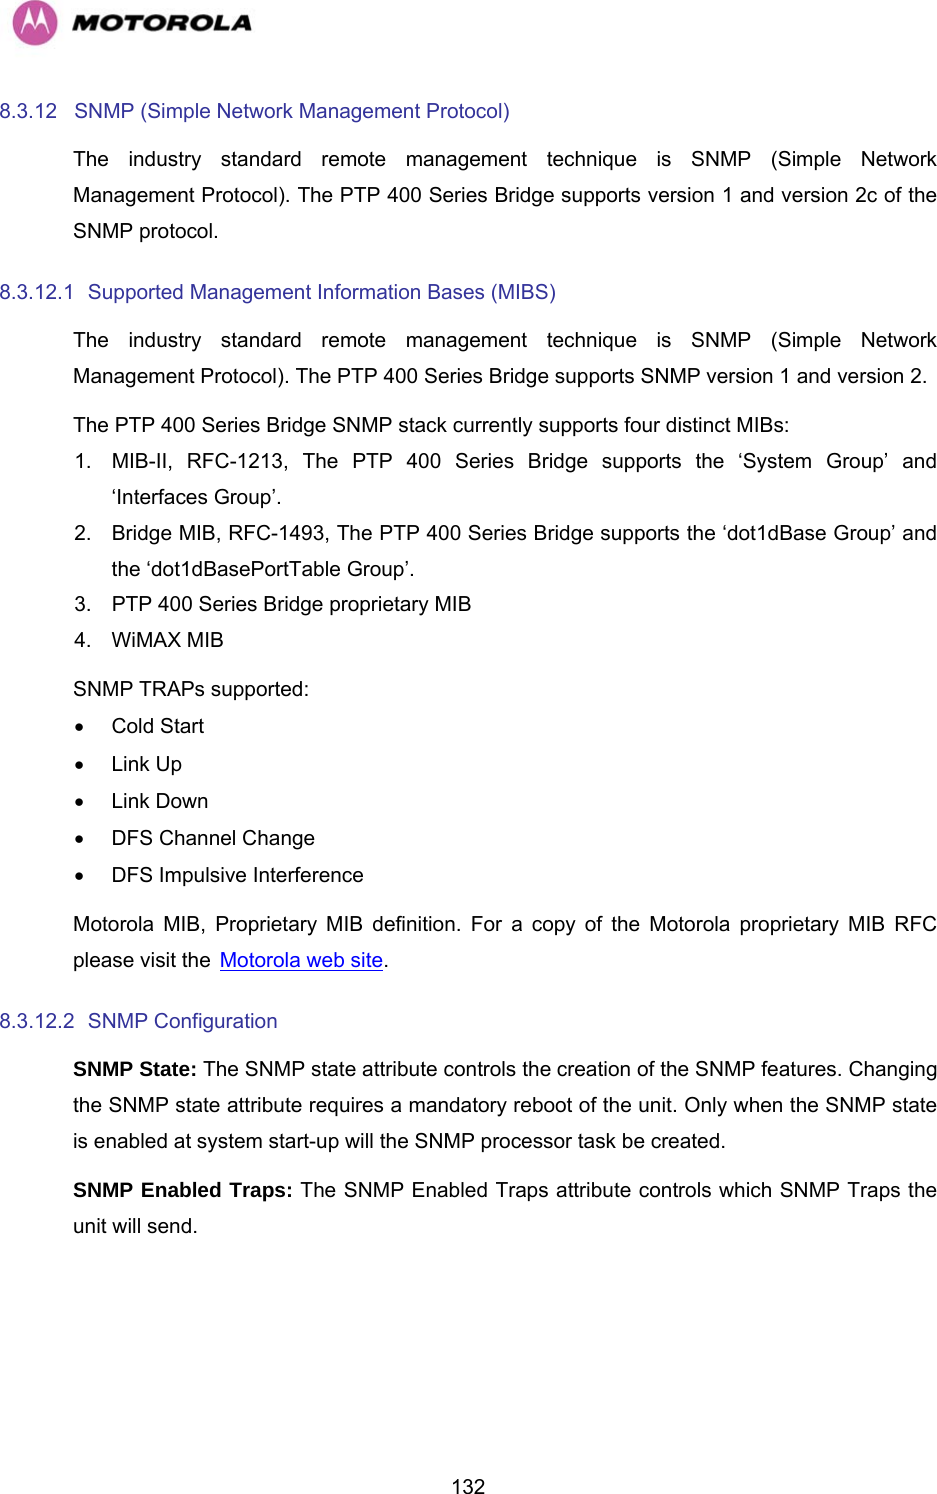   1328.3.12  SNMP (Simple Network Management Protocol)  The industry standard remote management technique is SNMP (Simple Network Management Protocol). The PTP 400 Series Bridge supports version 1 and version 2c of the SNMP protocol. 8.3.12.1  Supported Management Information Bases (MIBS)  The industry standard remote management technique is SNMP (Simple Network Management Protocol). The PTP 400 Series Bridge supports SNMP version 1 and version 2. The PTP 400 Series Bridge SNMP stack currently supports four distinct MIBs: 1.  MIB-II, RFC-1213, The PTP 400 Series Bridge supports the ‘System Group’ and ‘Interfaces Group’. 2.  Bridge MIB, RFC-1493, The PTP 400 Series Bridge supports the ‘dot1dBase Group’ and the ‘dot1dBasePortTable Group’. 3.  PTP 400 Series Bridge proprietary MIB 4.  WiMAX MIB  SNMP TRAPs supported: • Cold Start • Link Up • Link Down •  DFS Channel Change  •  DFS Impulsive Interference Motorola MIB, Proprietary MIB definition. For a copy of the Motorola proprietary MIB RFC please visit the HMotorola web site. 8.3.12.2  SNMP Configuration  SNMP State: The SNMP state attribute controls the creation of the SNMP features. Changing the SNMP state attribute requires a mandatory reboot of the unit. Only when the SNMP state is enabled at system start-up will the SNMP processor task be created. SNMP Enabled Traps: The SNMP Enabled Traps attribute controls which SNMP Traps the unit will send. 